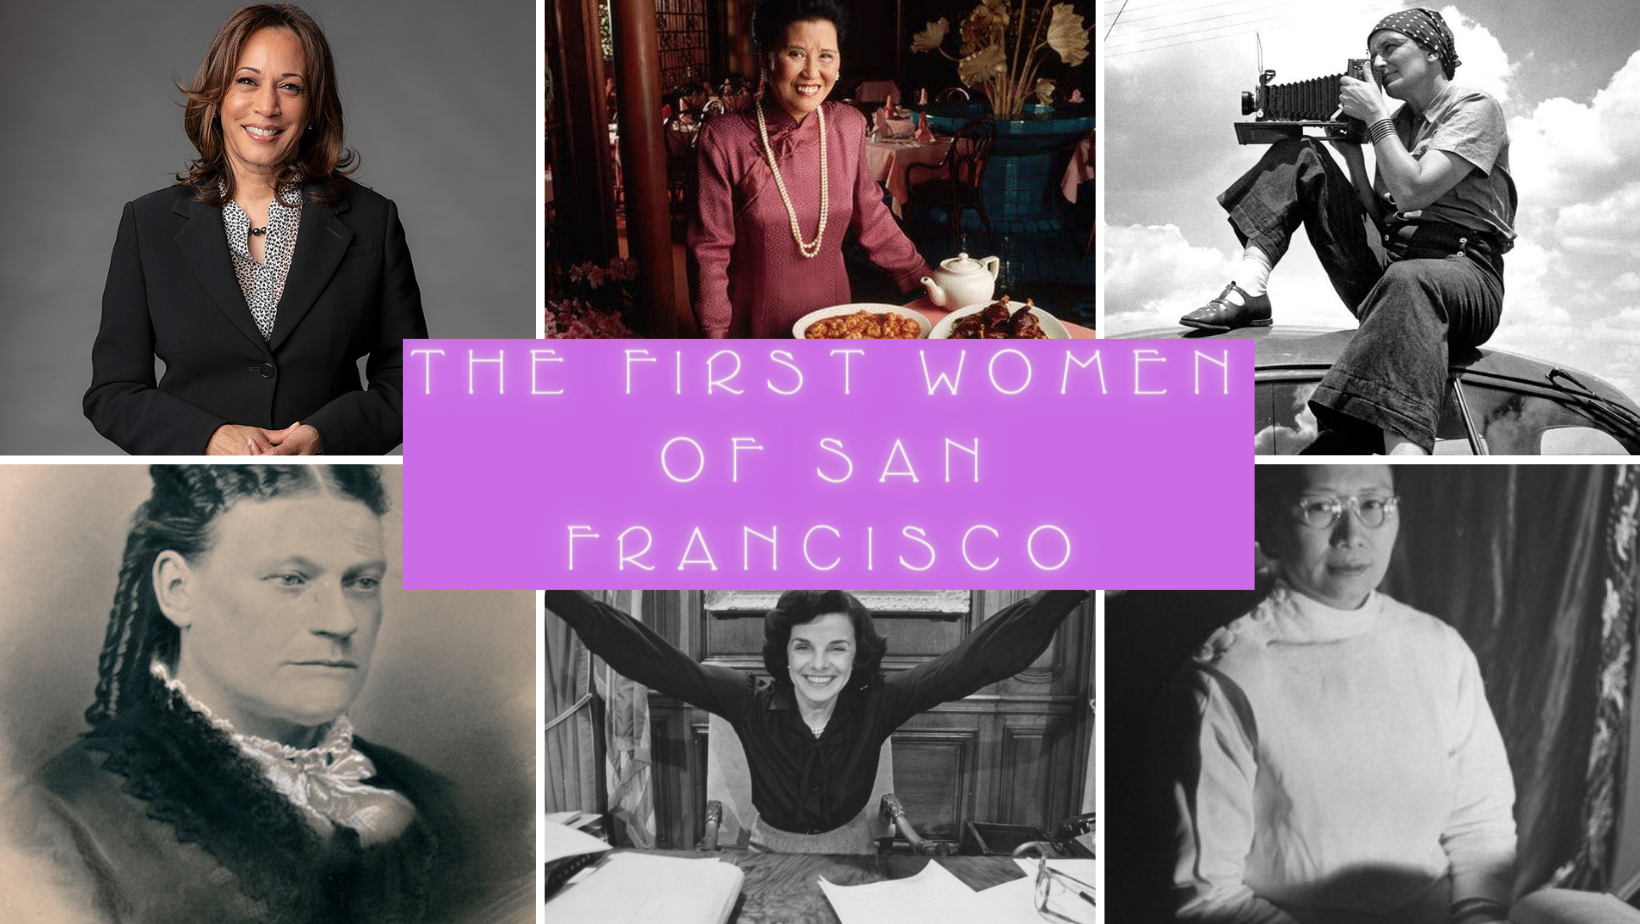 The First Women of San Francisco